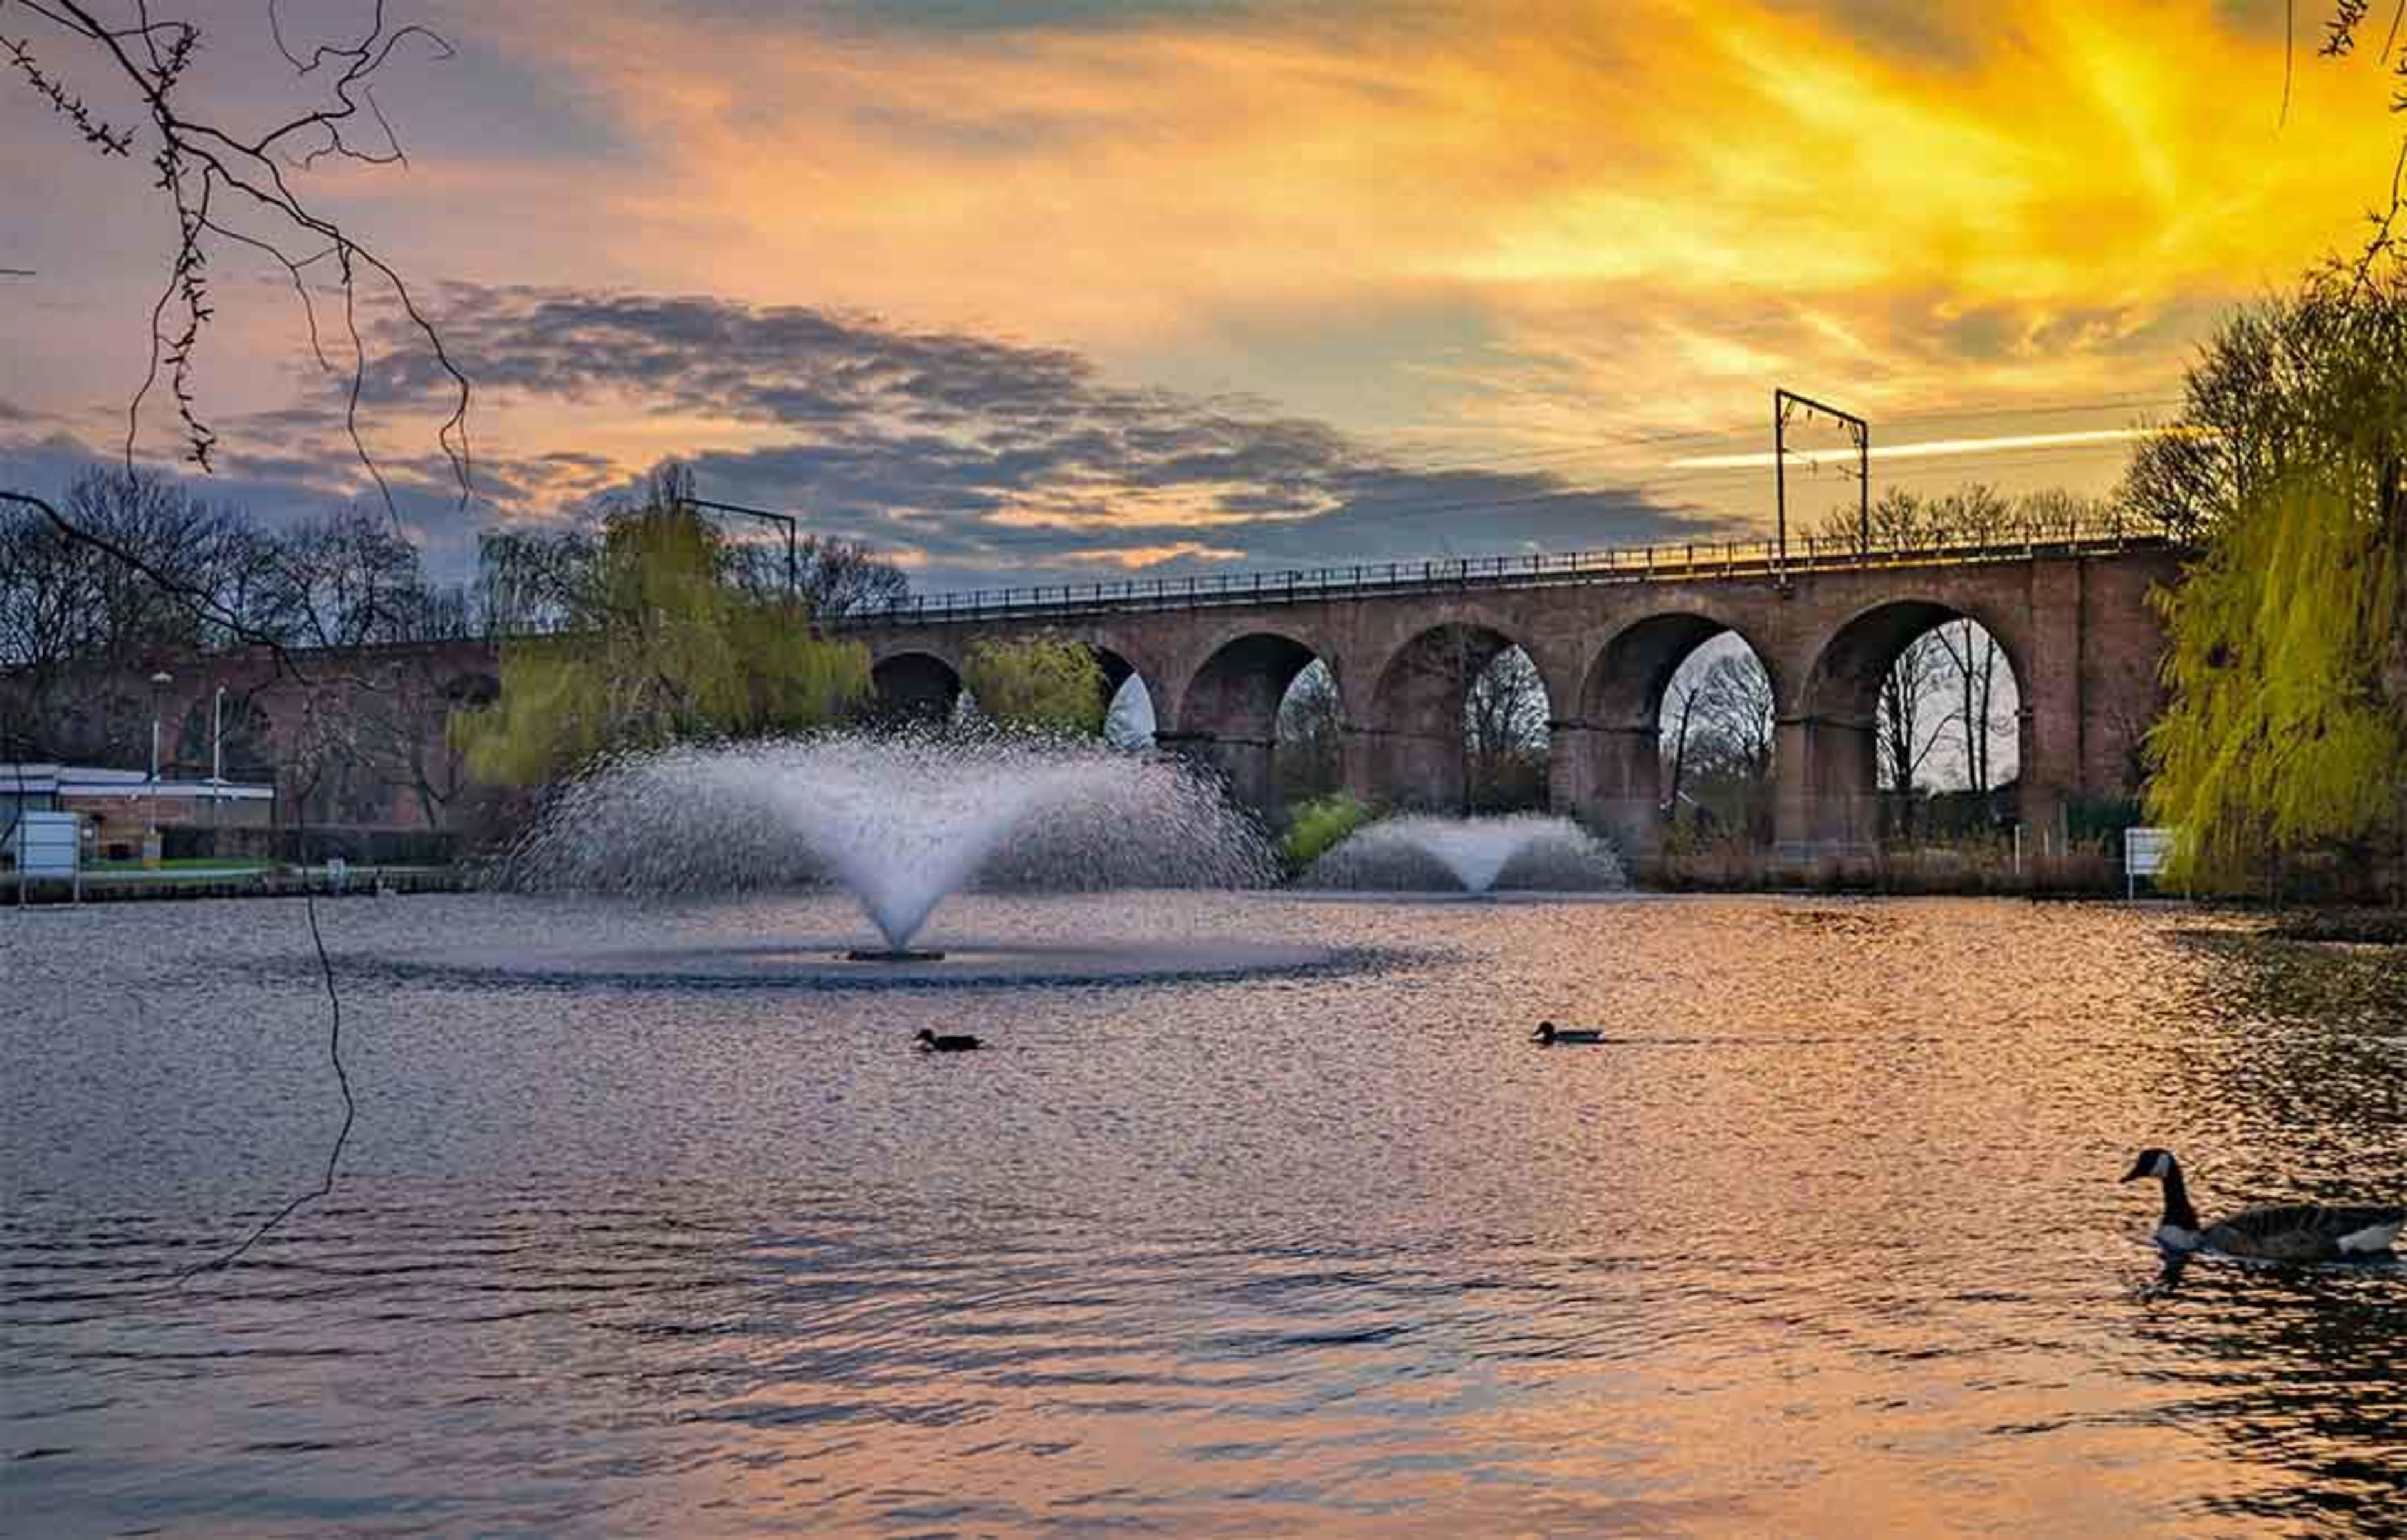 Chelmsford Viaduct at sunset with fountains in the foreground